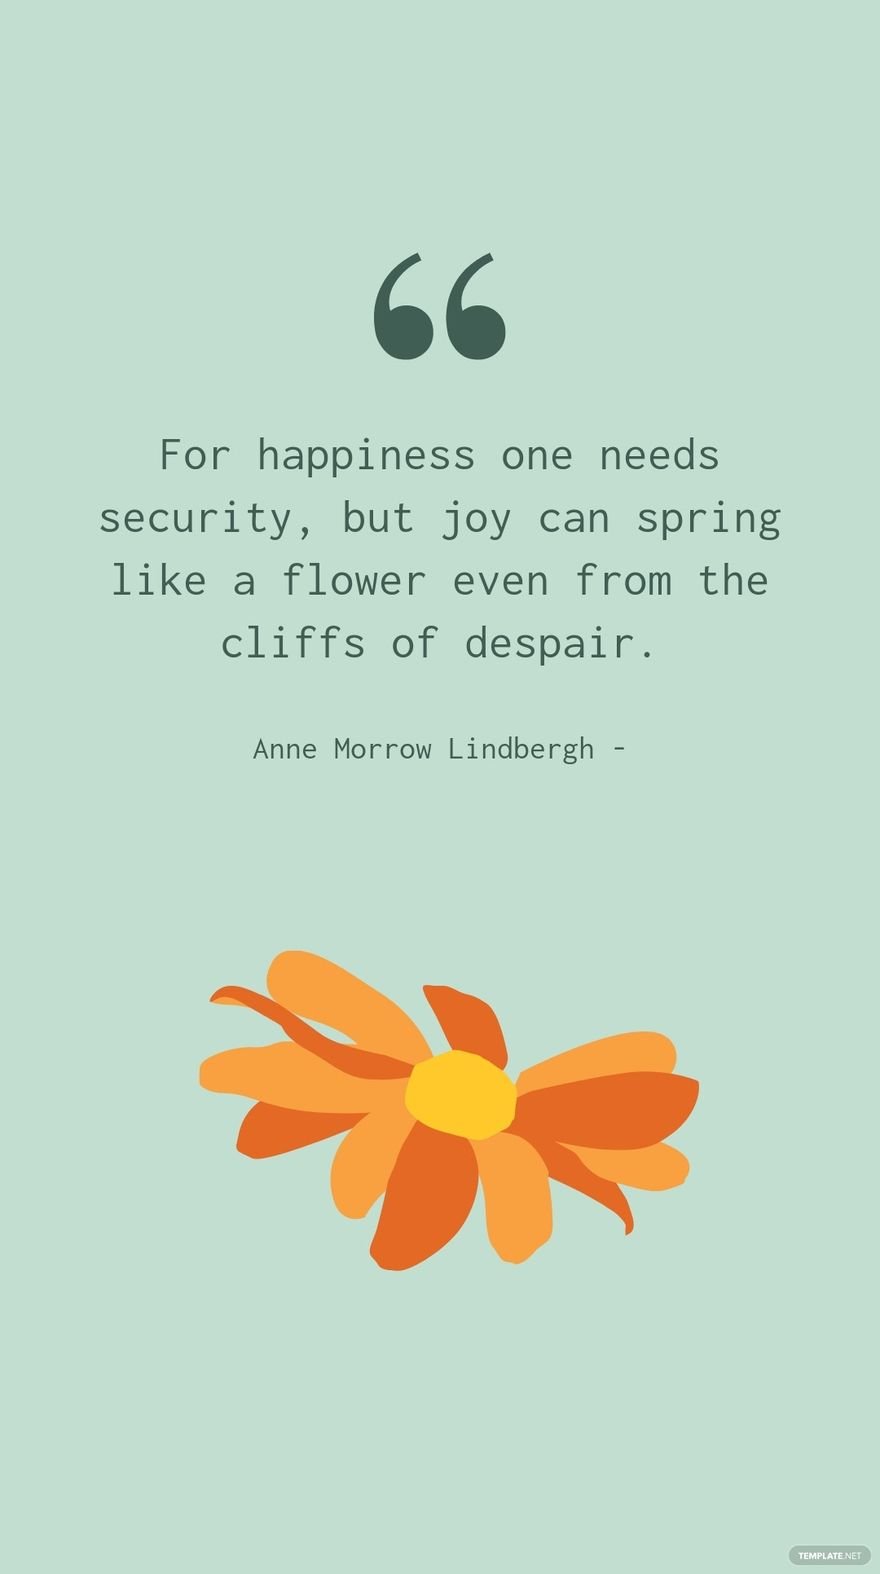 Free Anne Morrow Lindbergh - For happiness one needs security, but joy can spring like a flower even from the cliffs of despair. in JPG